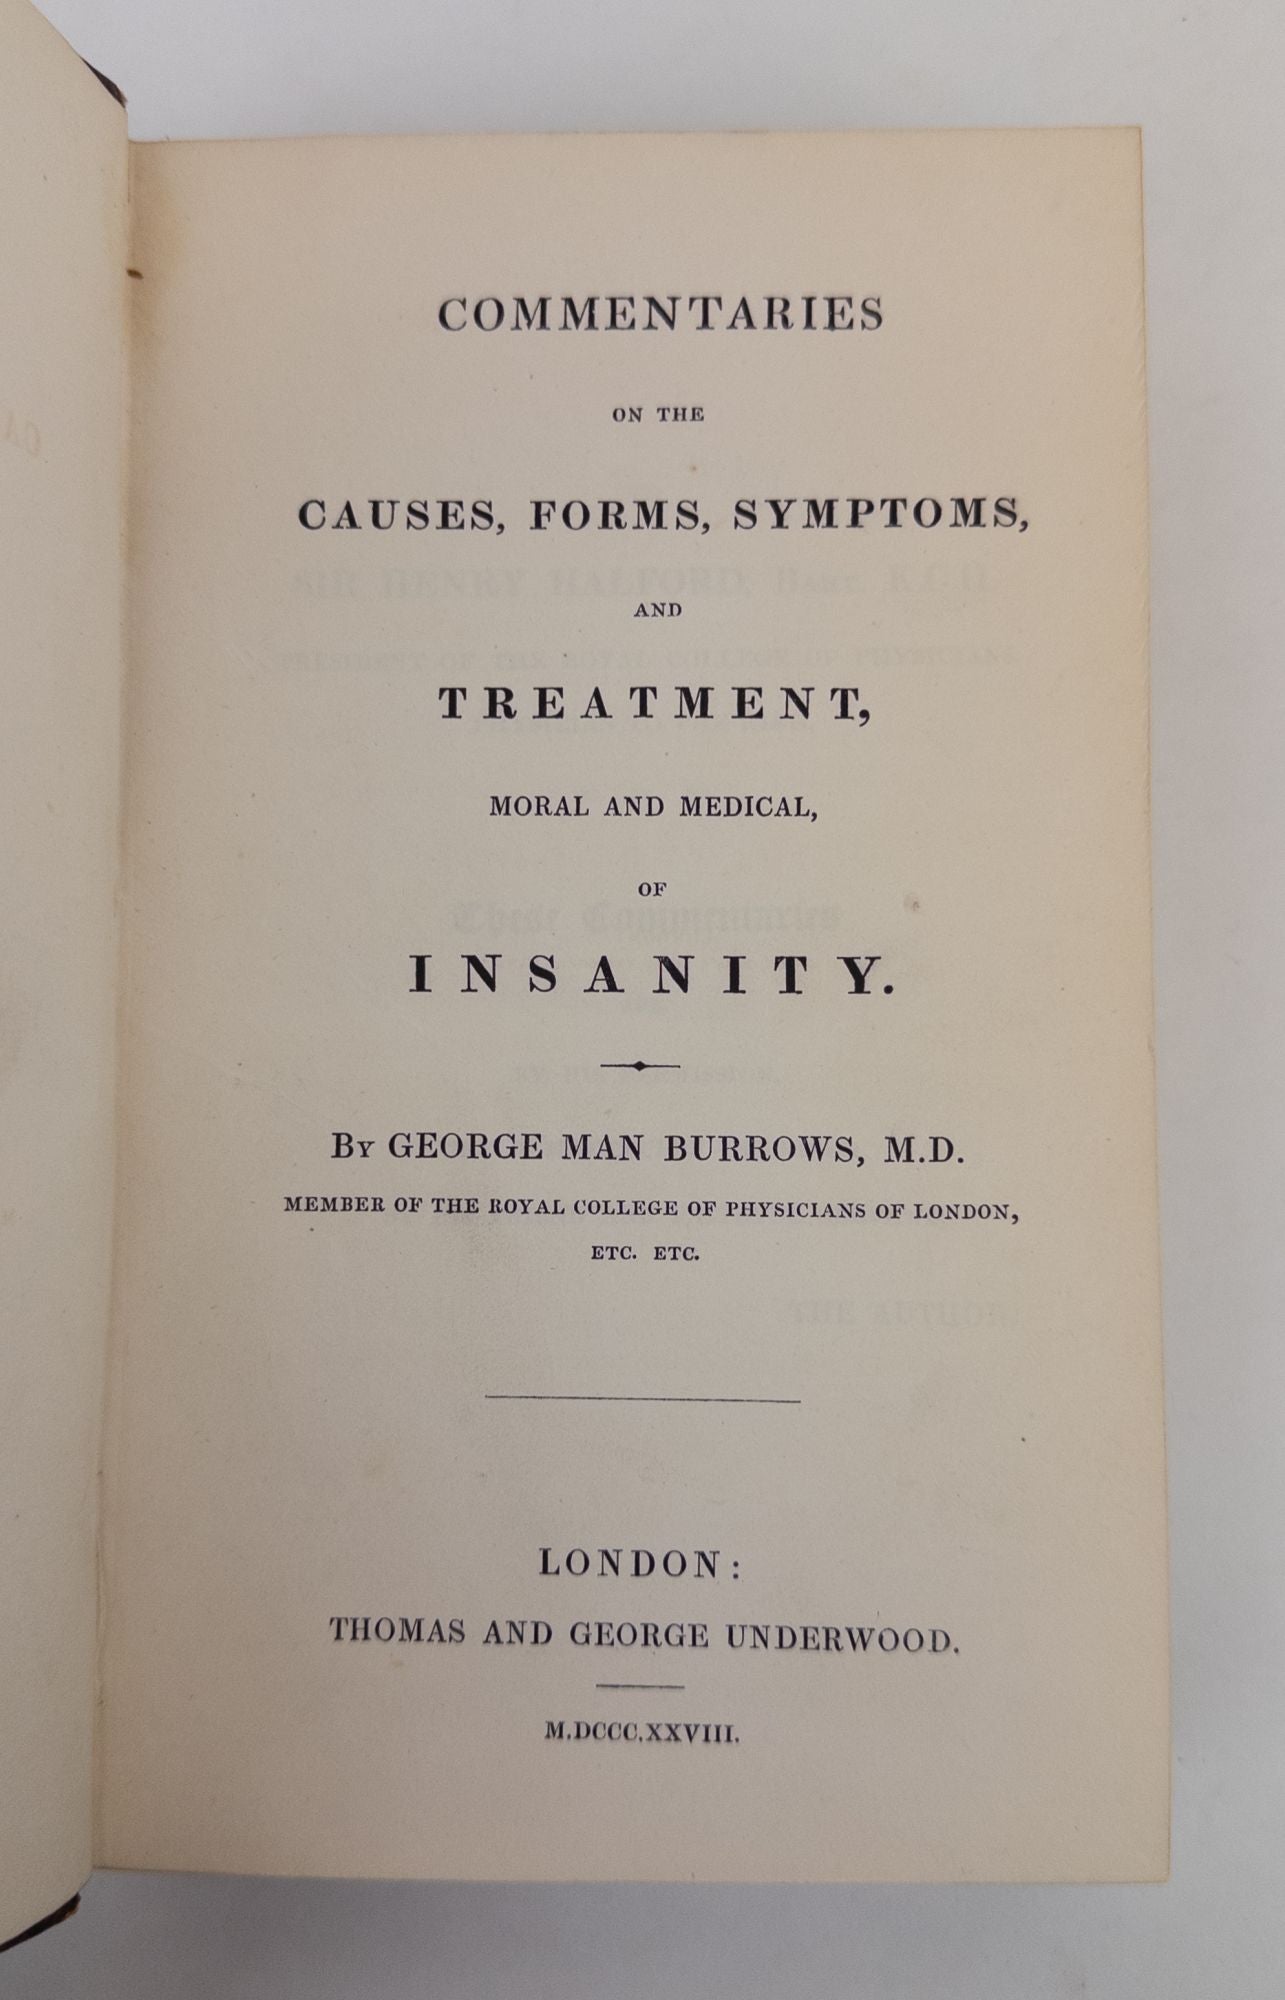 Product Image for COMMENTARIES ON THE CAUSES, FORMS, SYMPTOMS, AND TREATMENT, MORAL AND MEDICAL, OF INSANITY